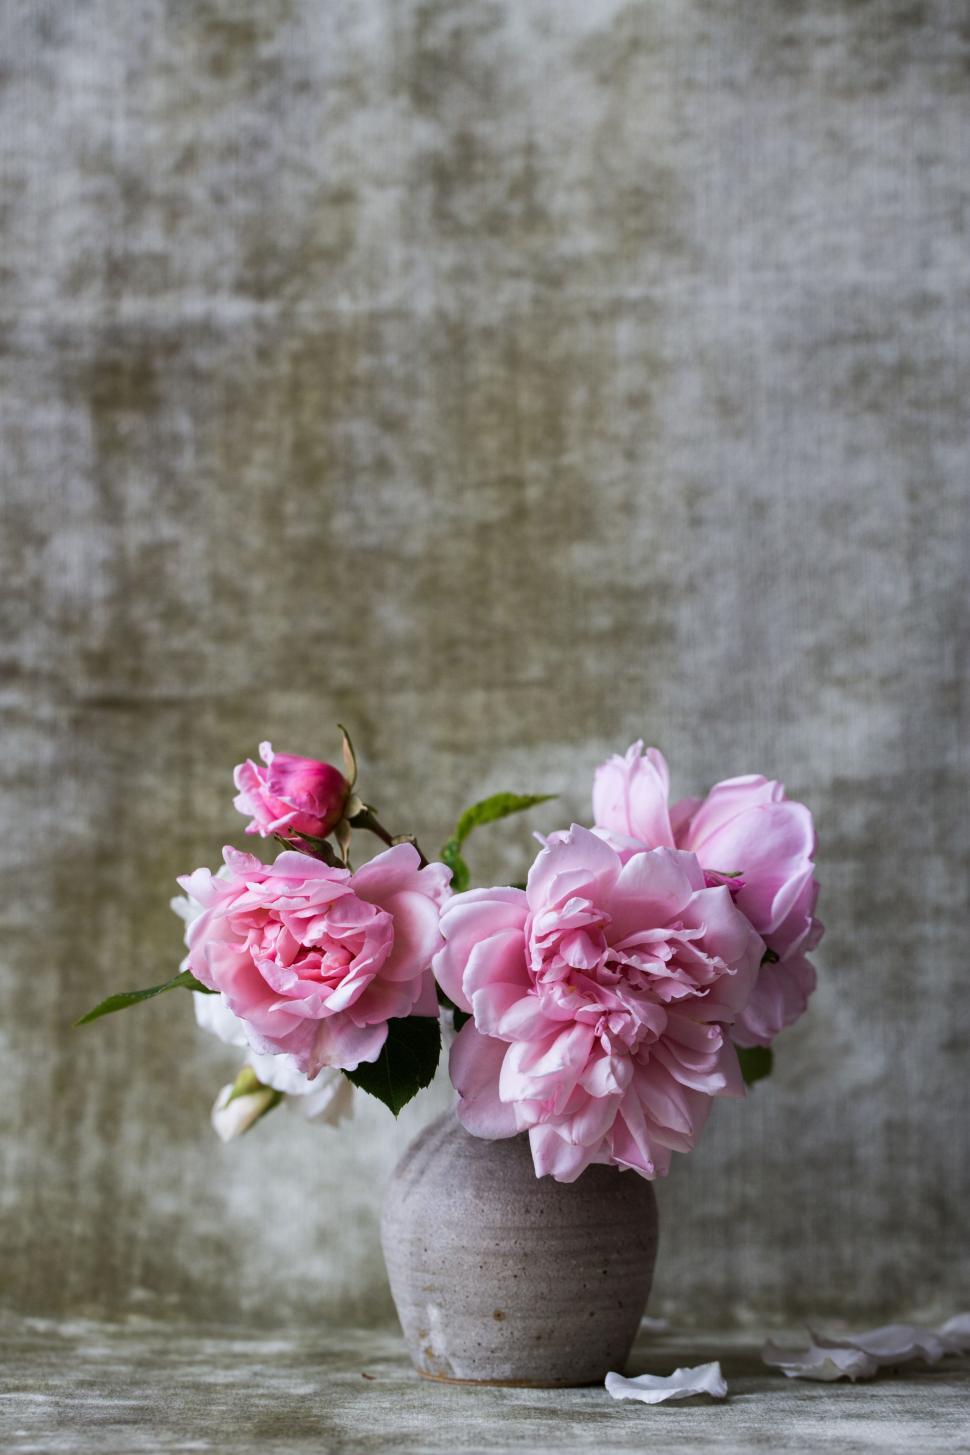 Free Image of Pink Flowers in Vase on Table 